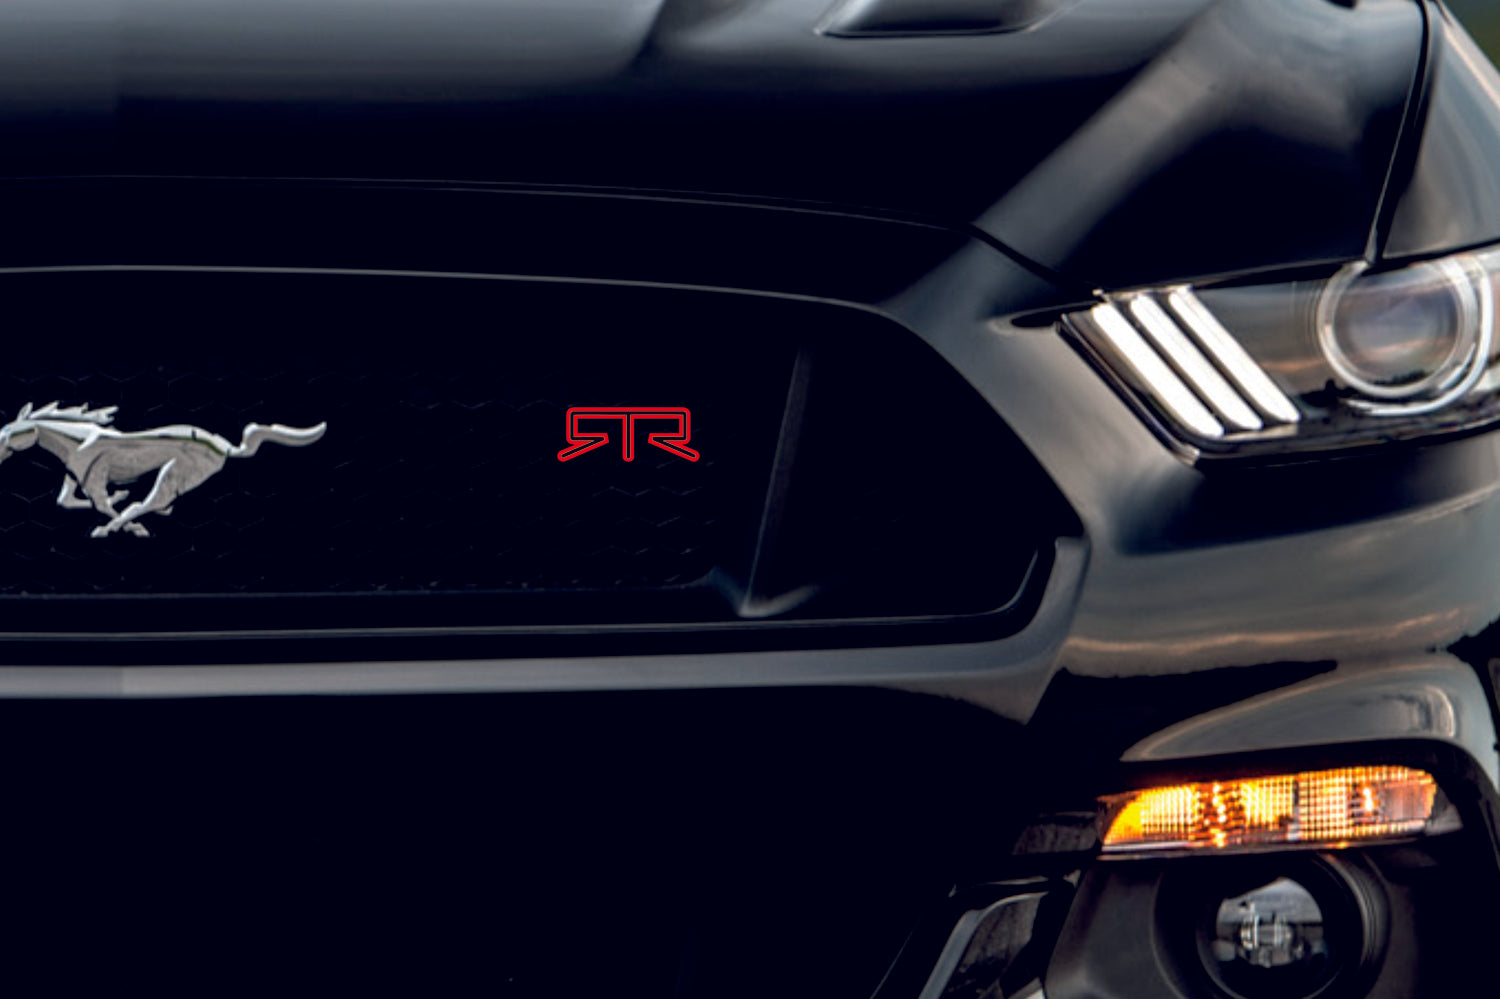 Ford Radiator grille emblem with RTR logo